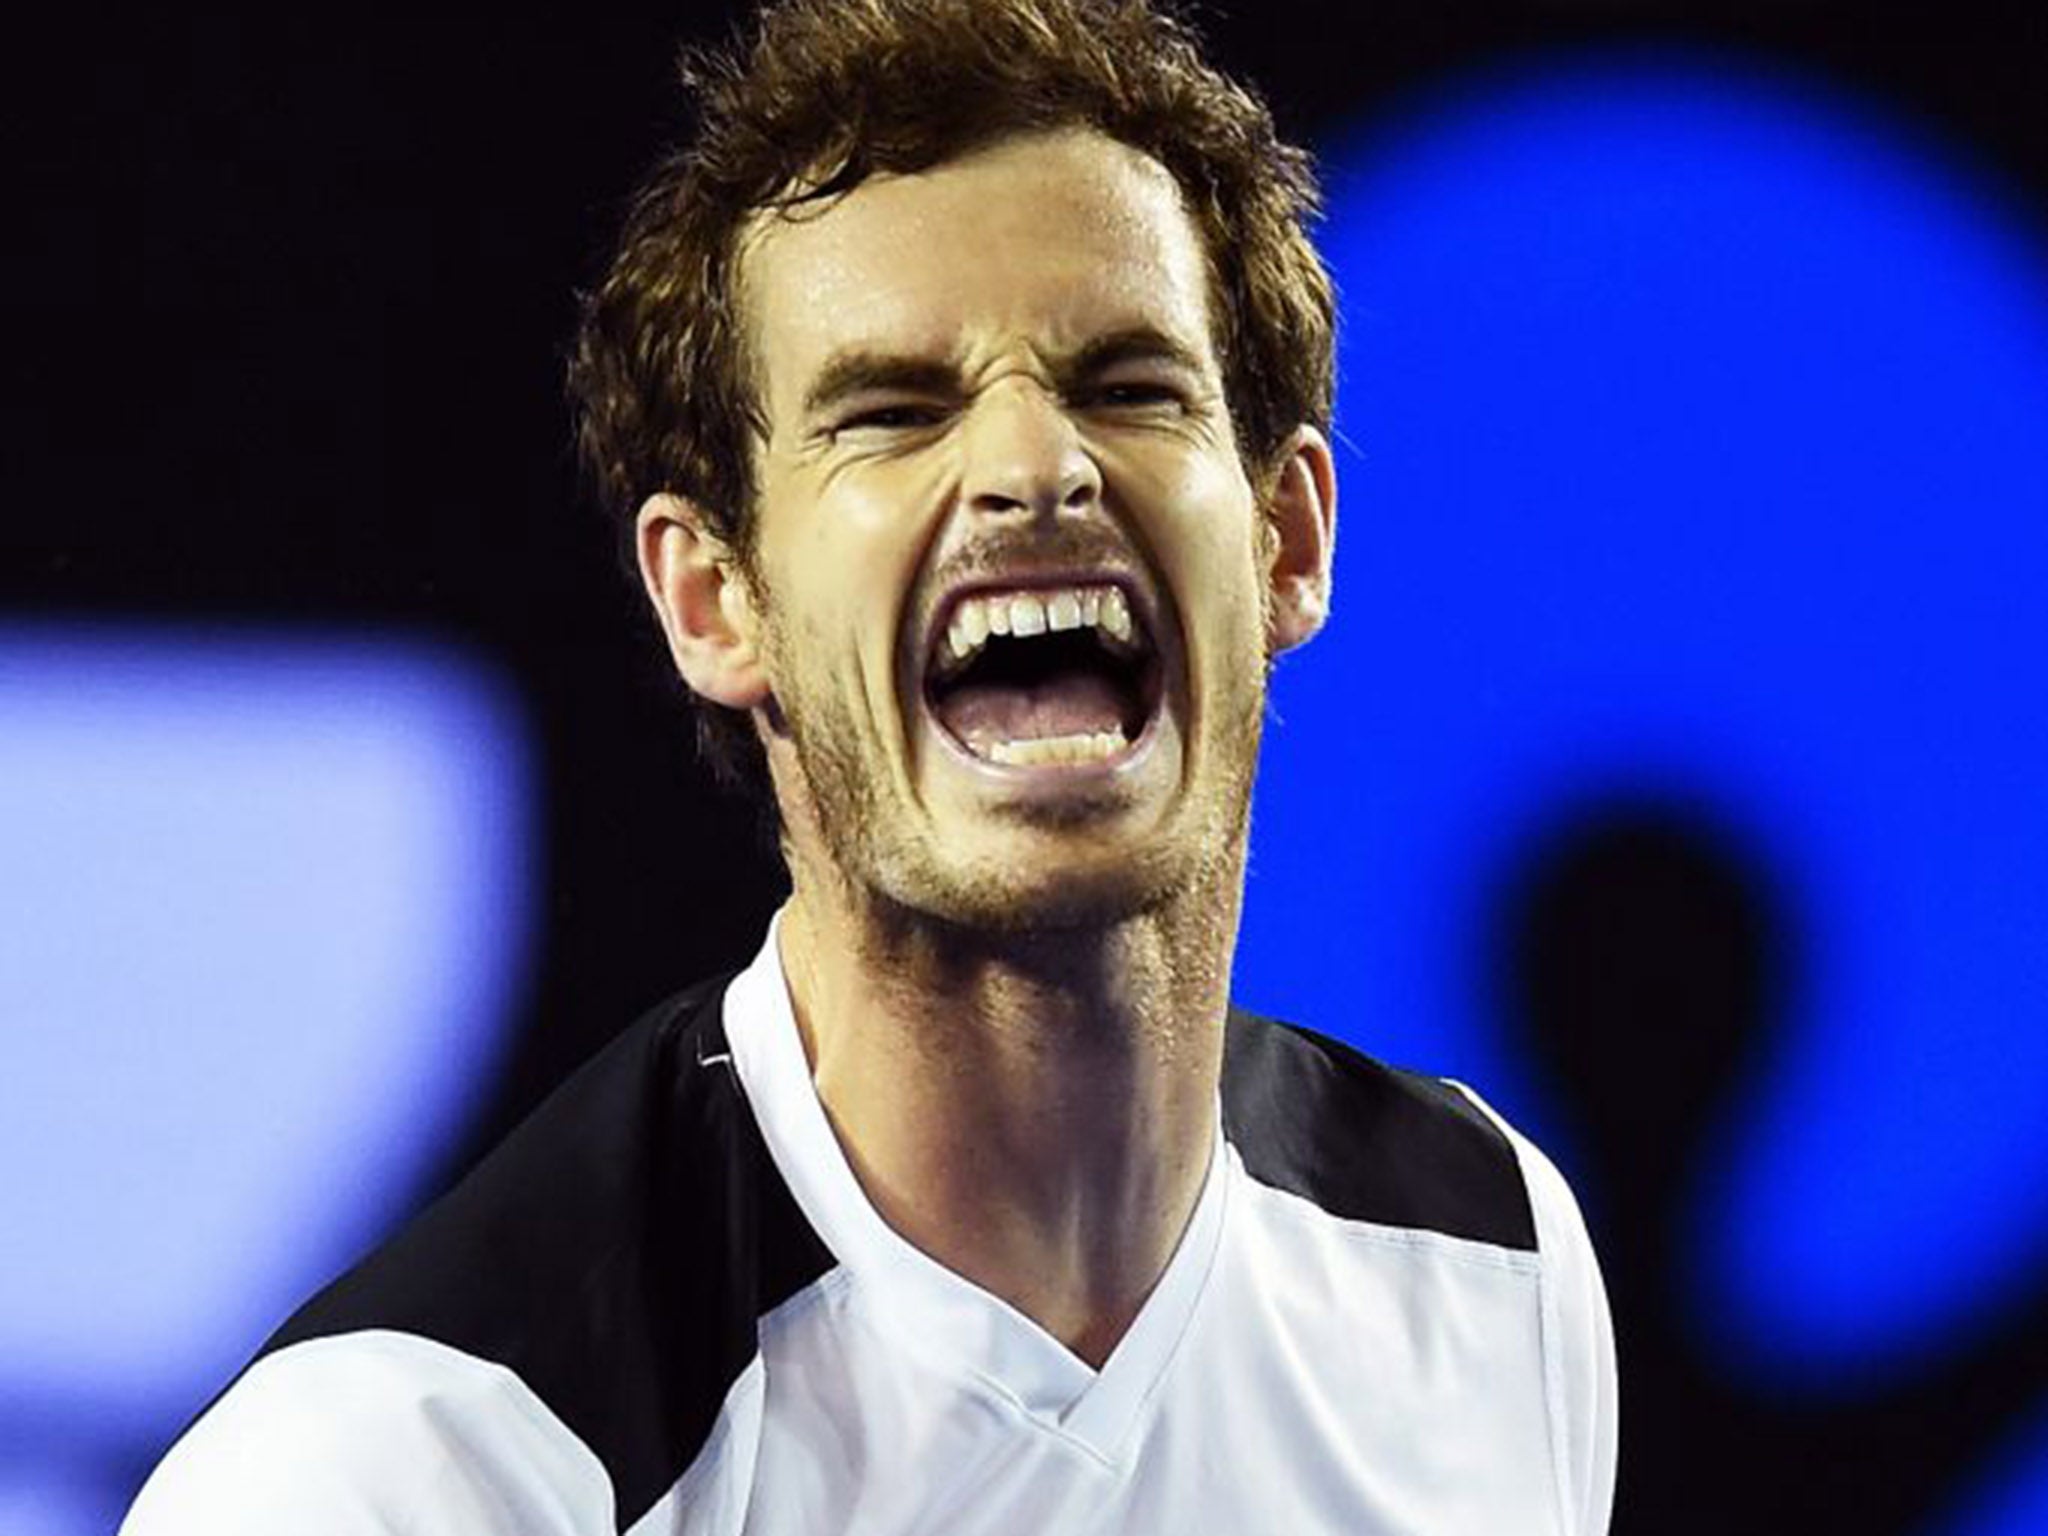 Andy Murray reacts during play against Milos Raonic of Canada on day twelve of the Australian Open tennis tournament in Melbourne, Australia